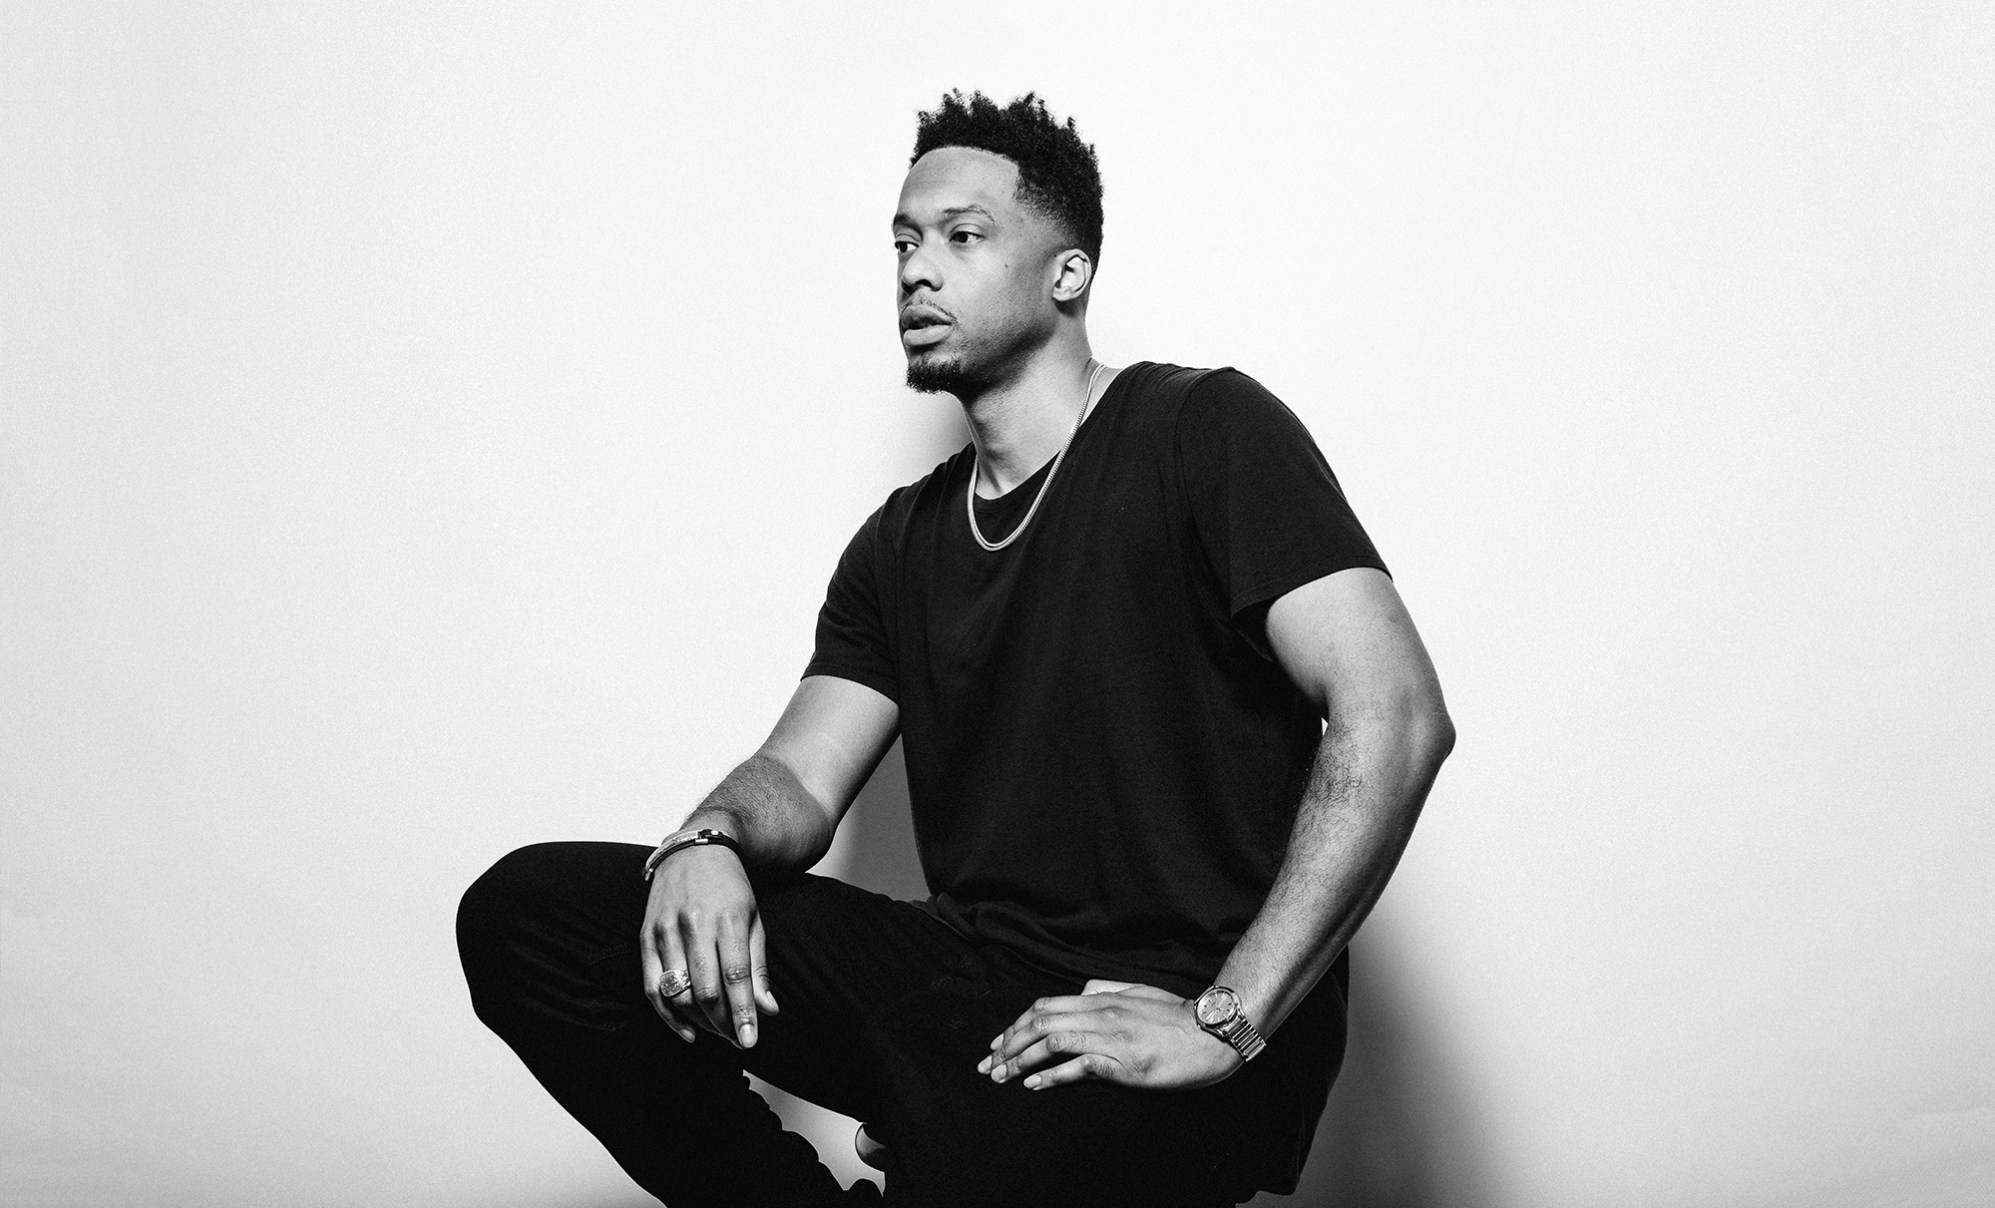 “I just felt like it was the right time” – Black Milk on FEVER, his new album